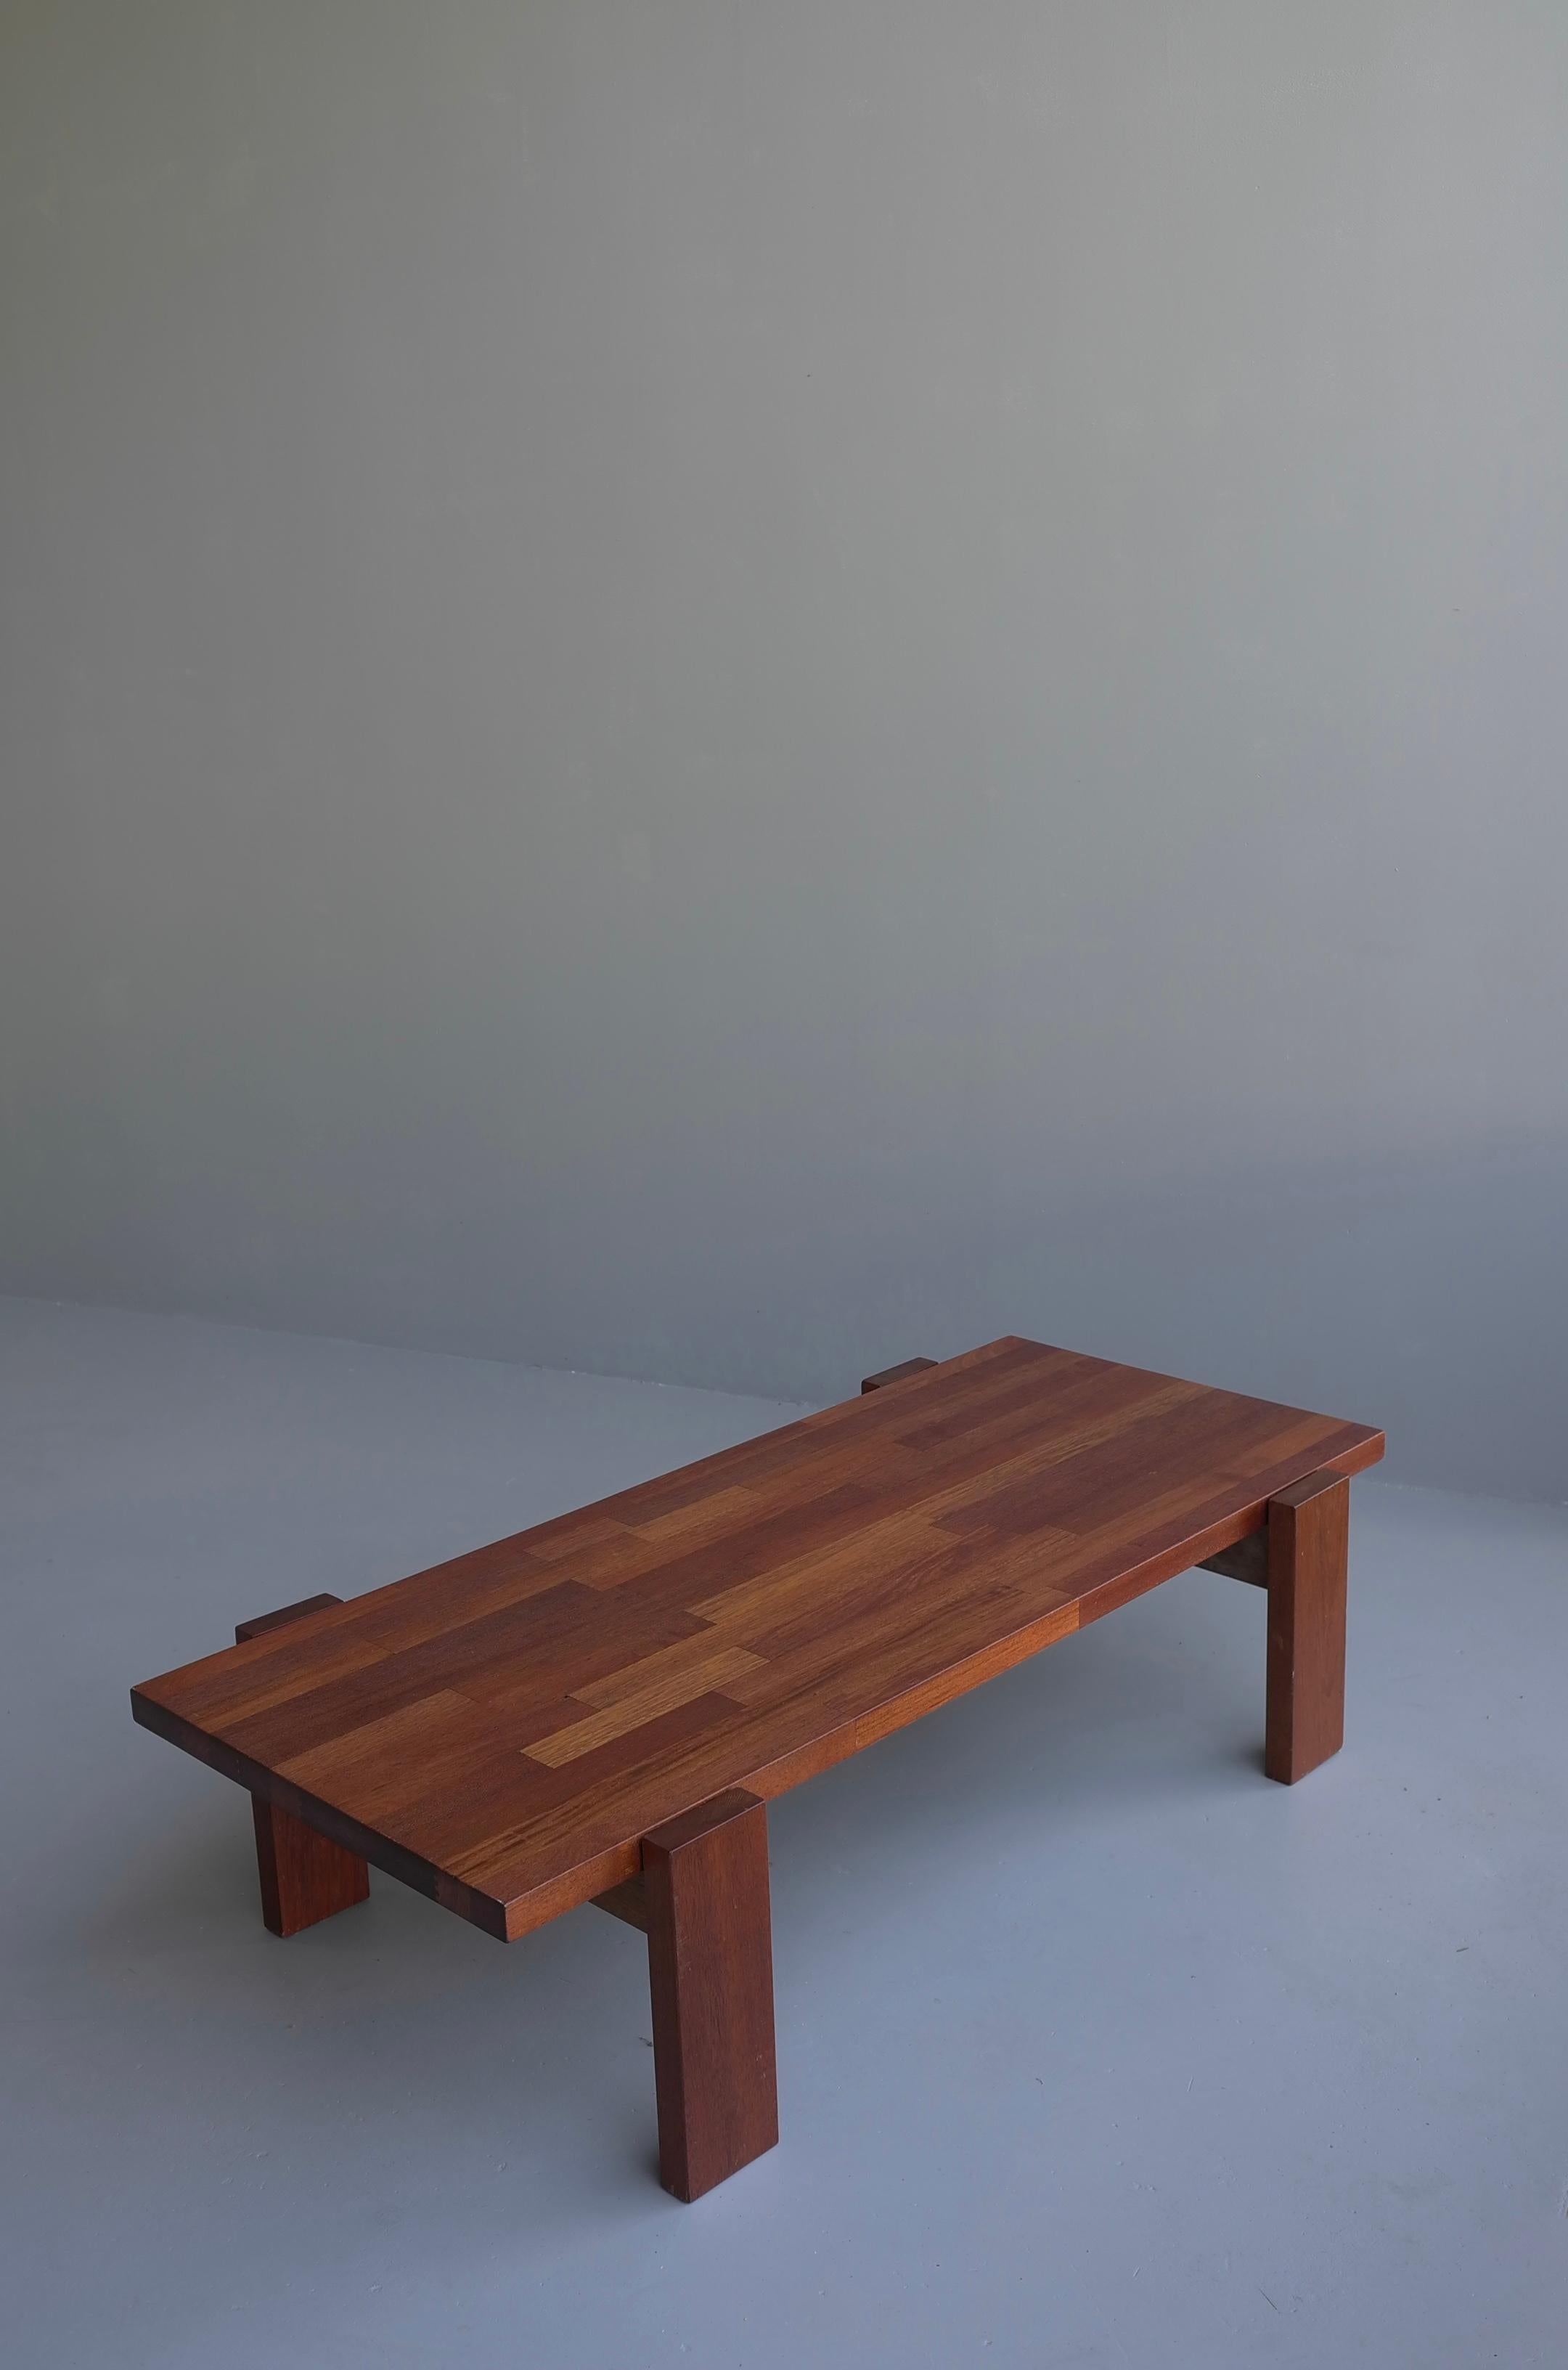 Robust Hardwood Coffee Table in Style of Jorge Zalszupin, Brazil, 1960s For Sale 6